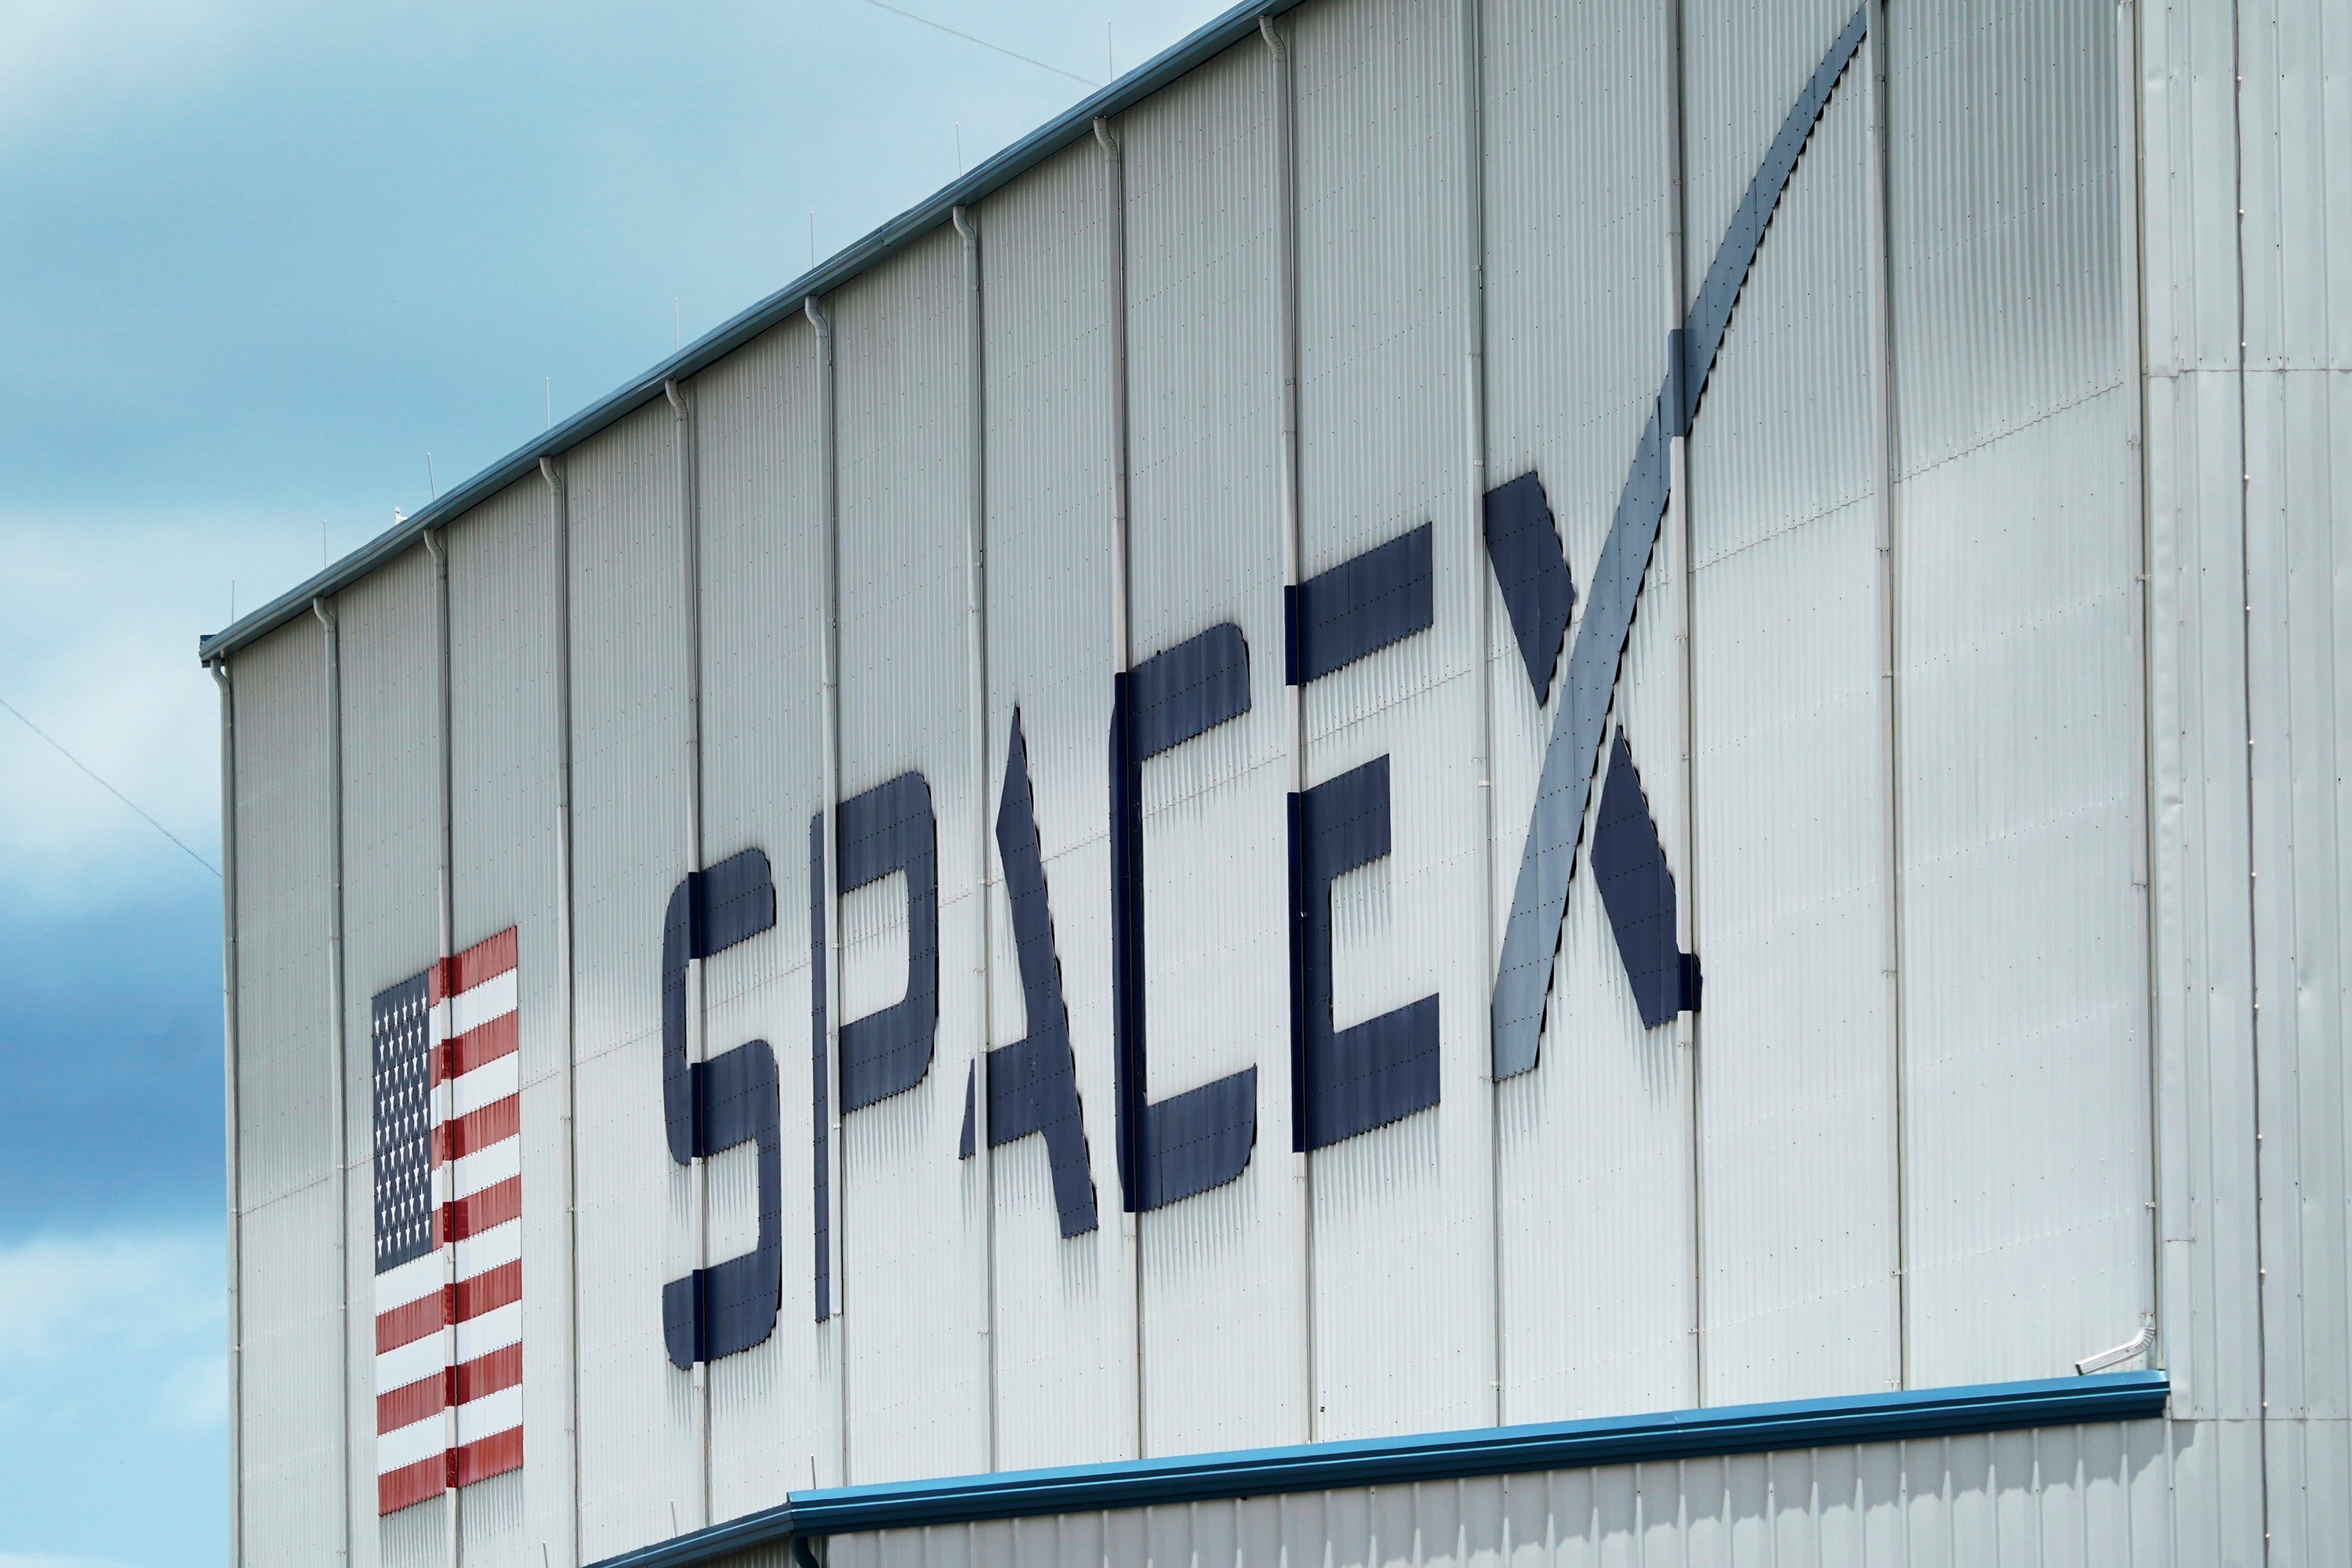 The SpaceX logo is displayed on a building on 26 May, 2020, at the Kennedy Space Center in Cape Canaveral, Florida